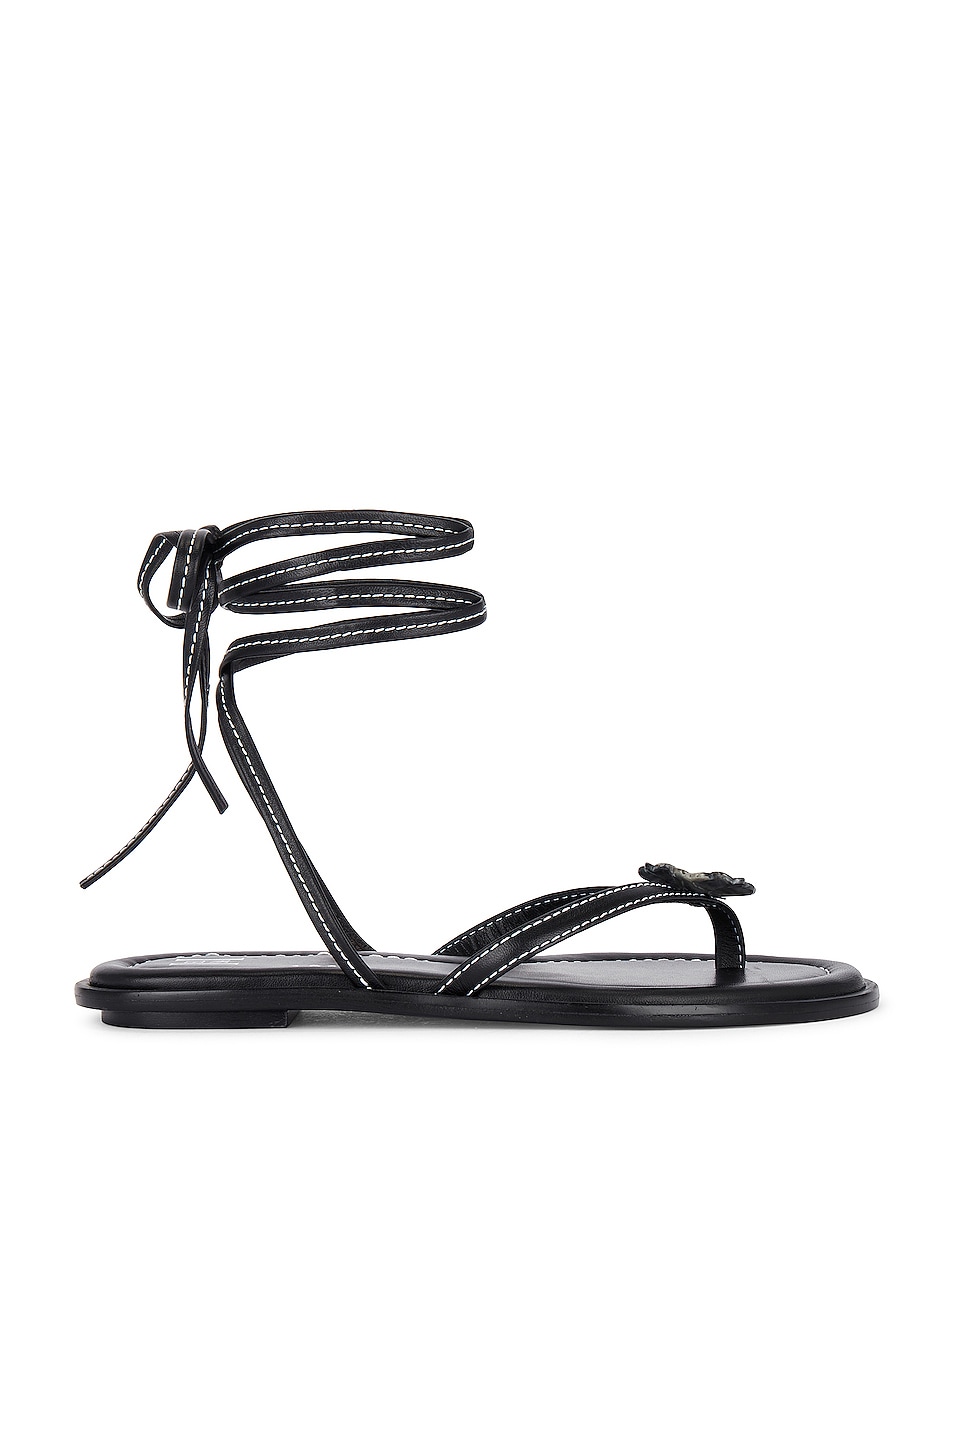 Lace Up Sandal in Black